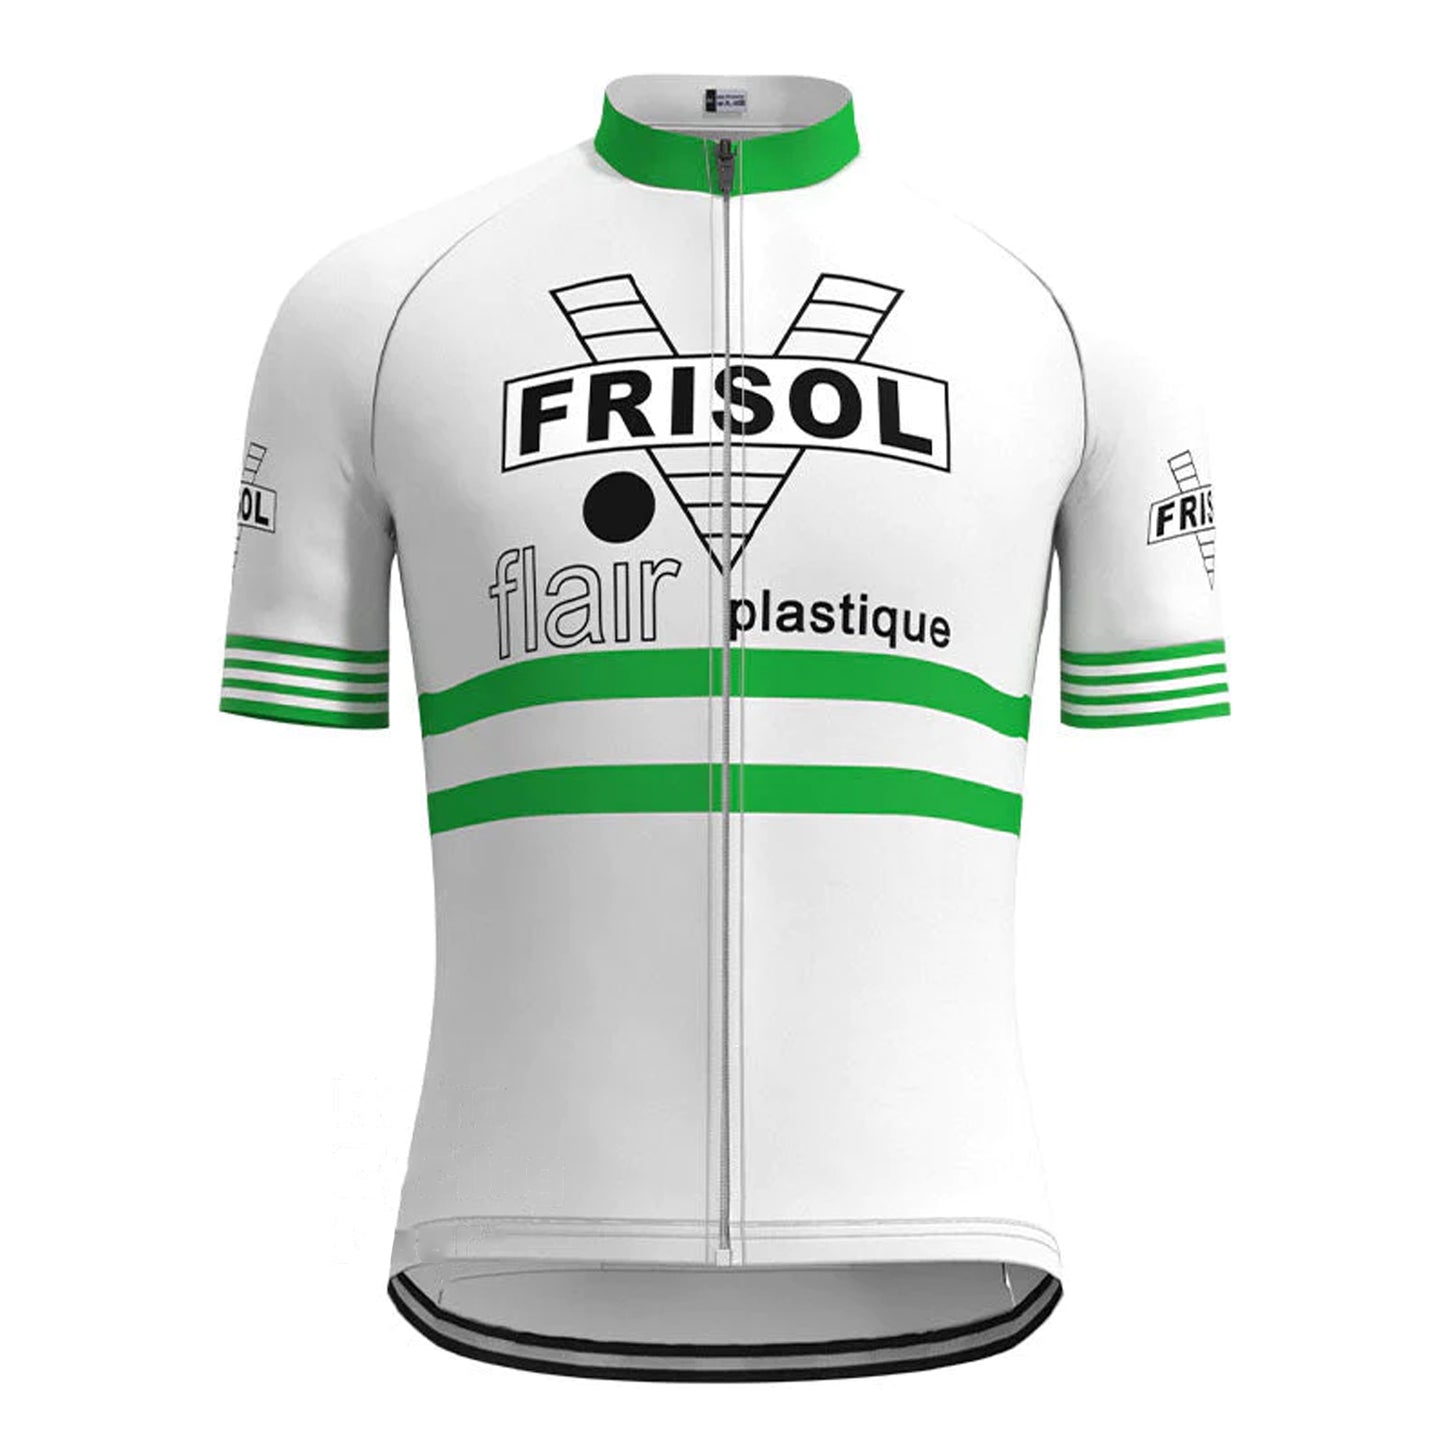 Frisol Green Vintage Short Sleeve Cycling Jersey Top